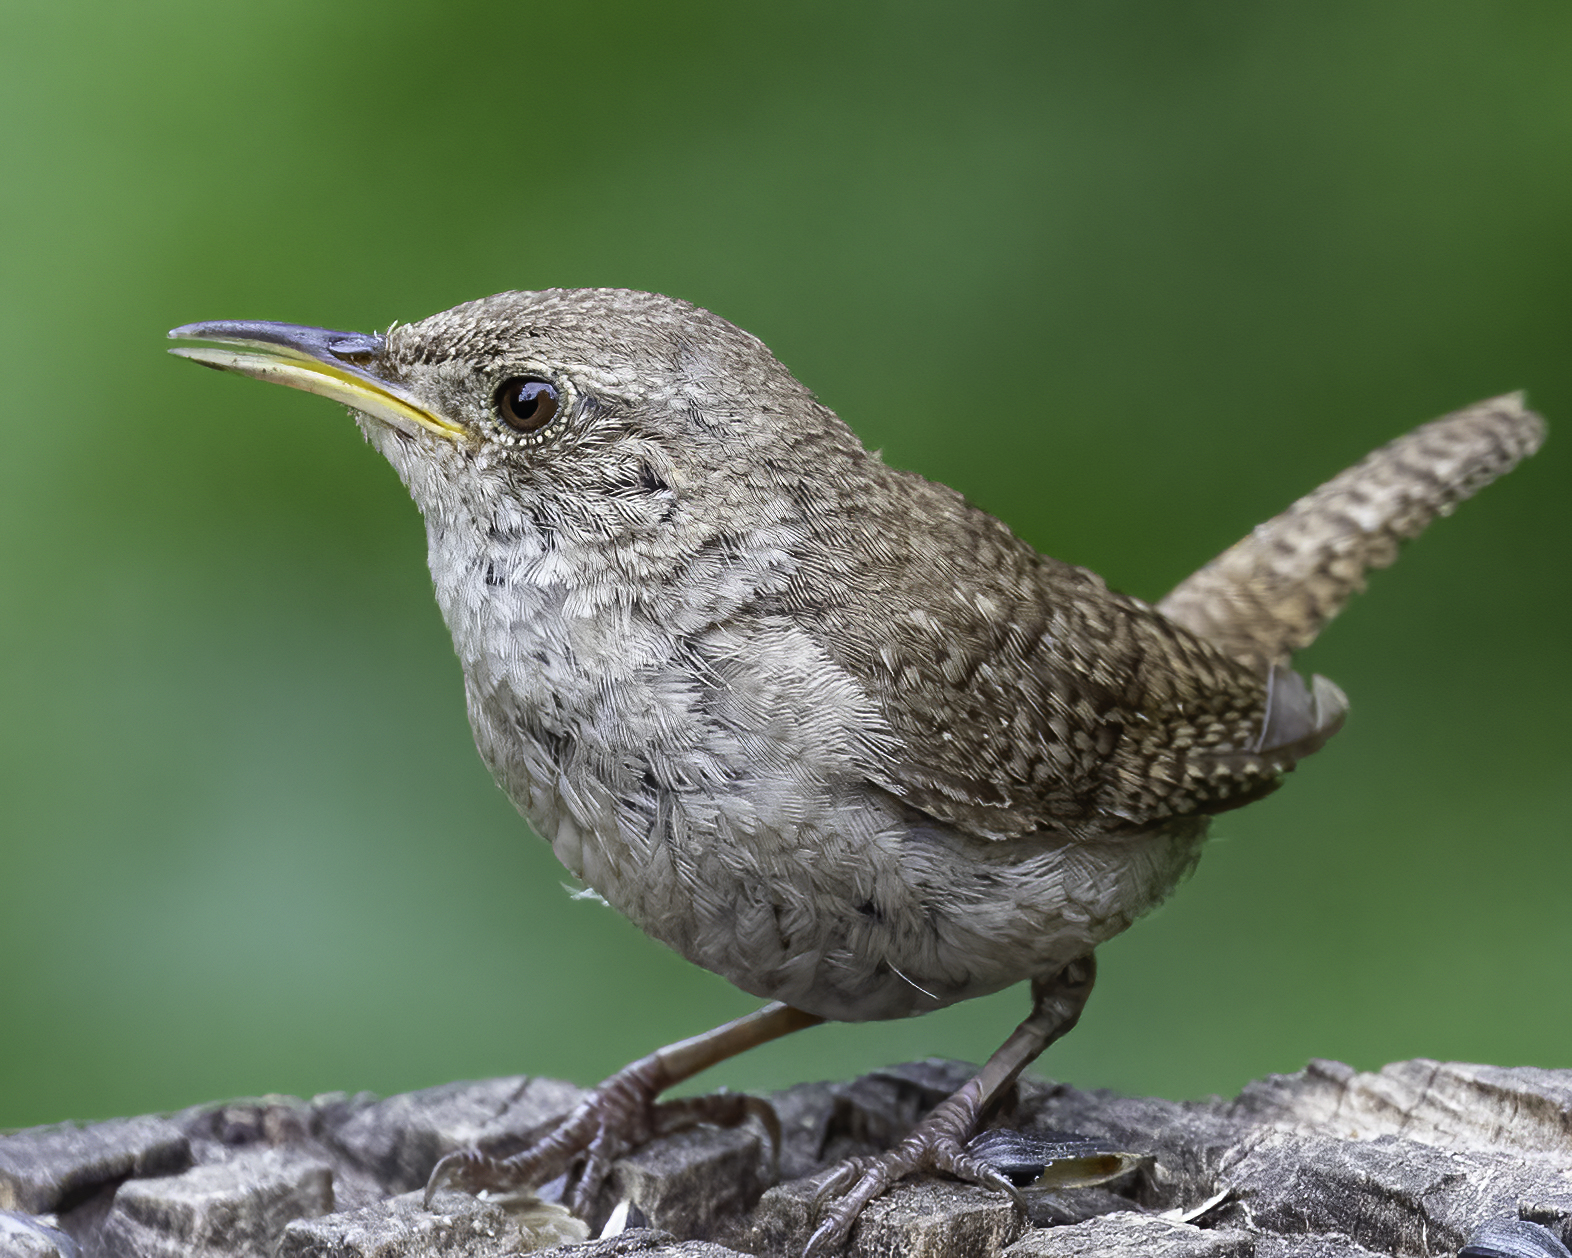 a close up of a house wren, a small gray and brown bird